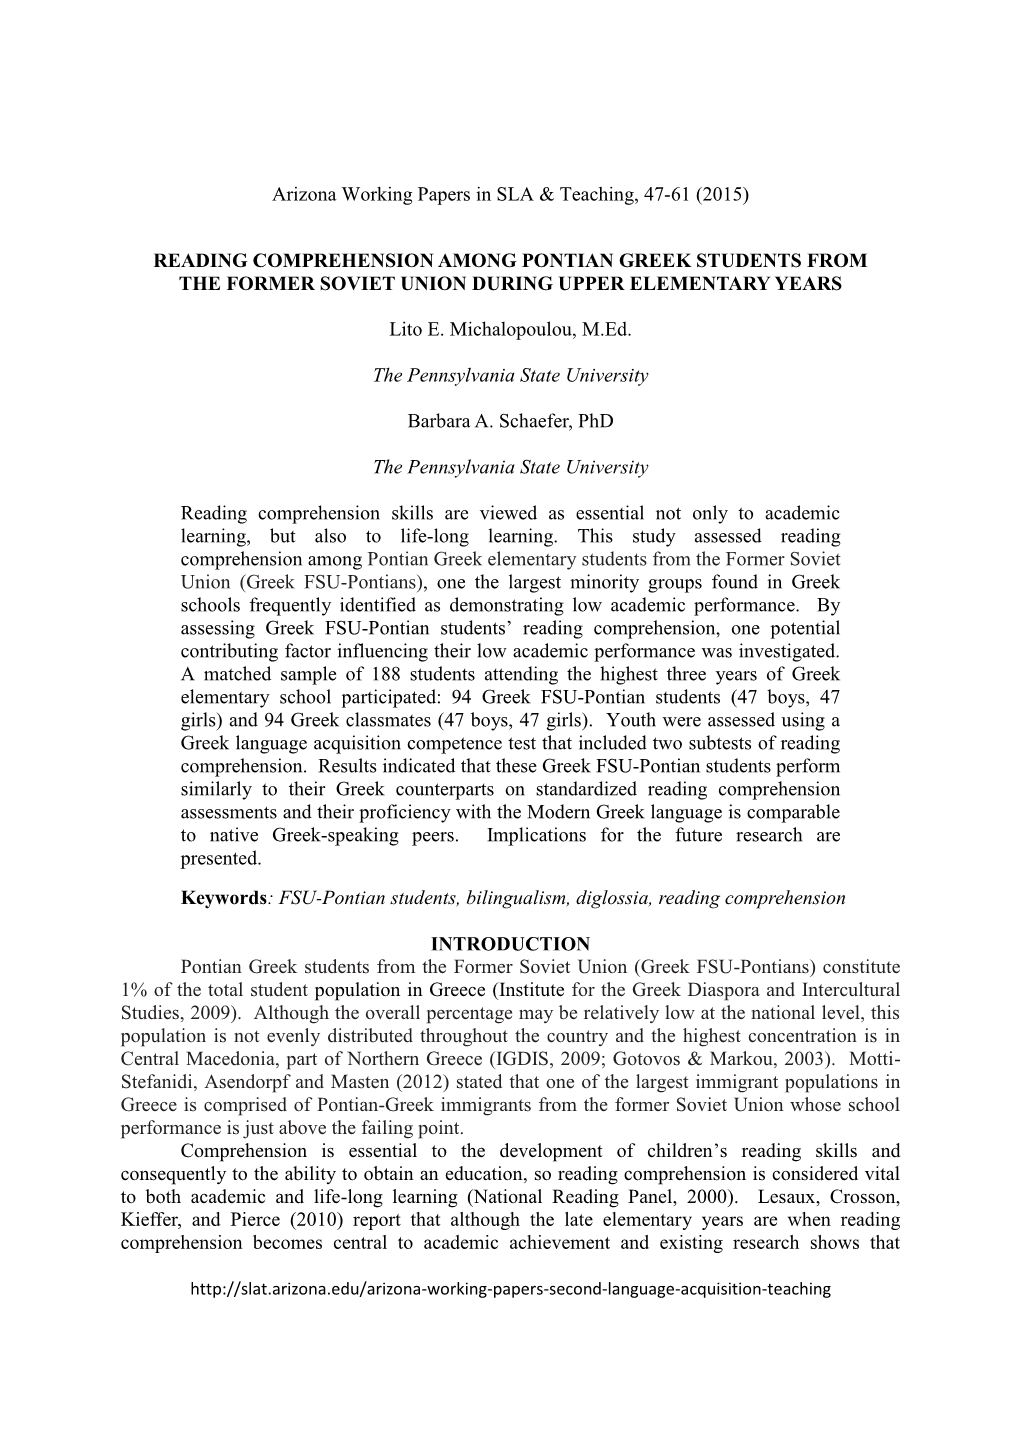 Arizona Working Papers in SLA & Teaching, 47-61 (2015) READING COMPREHENSION AMONG PONTIAN GREEK STUDENTS from the FORMER SO